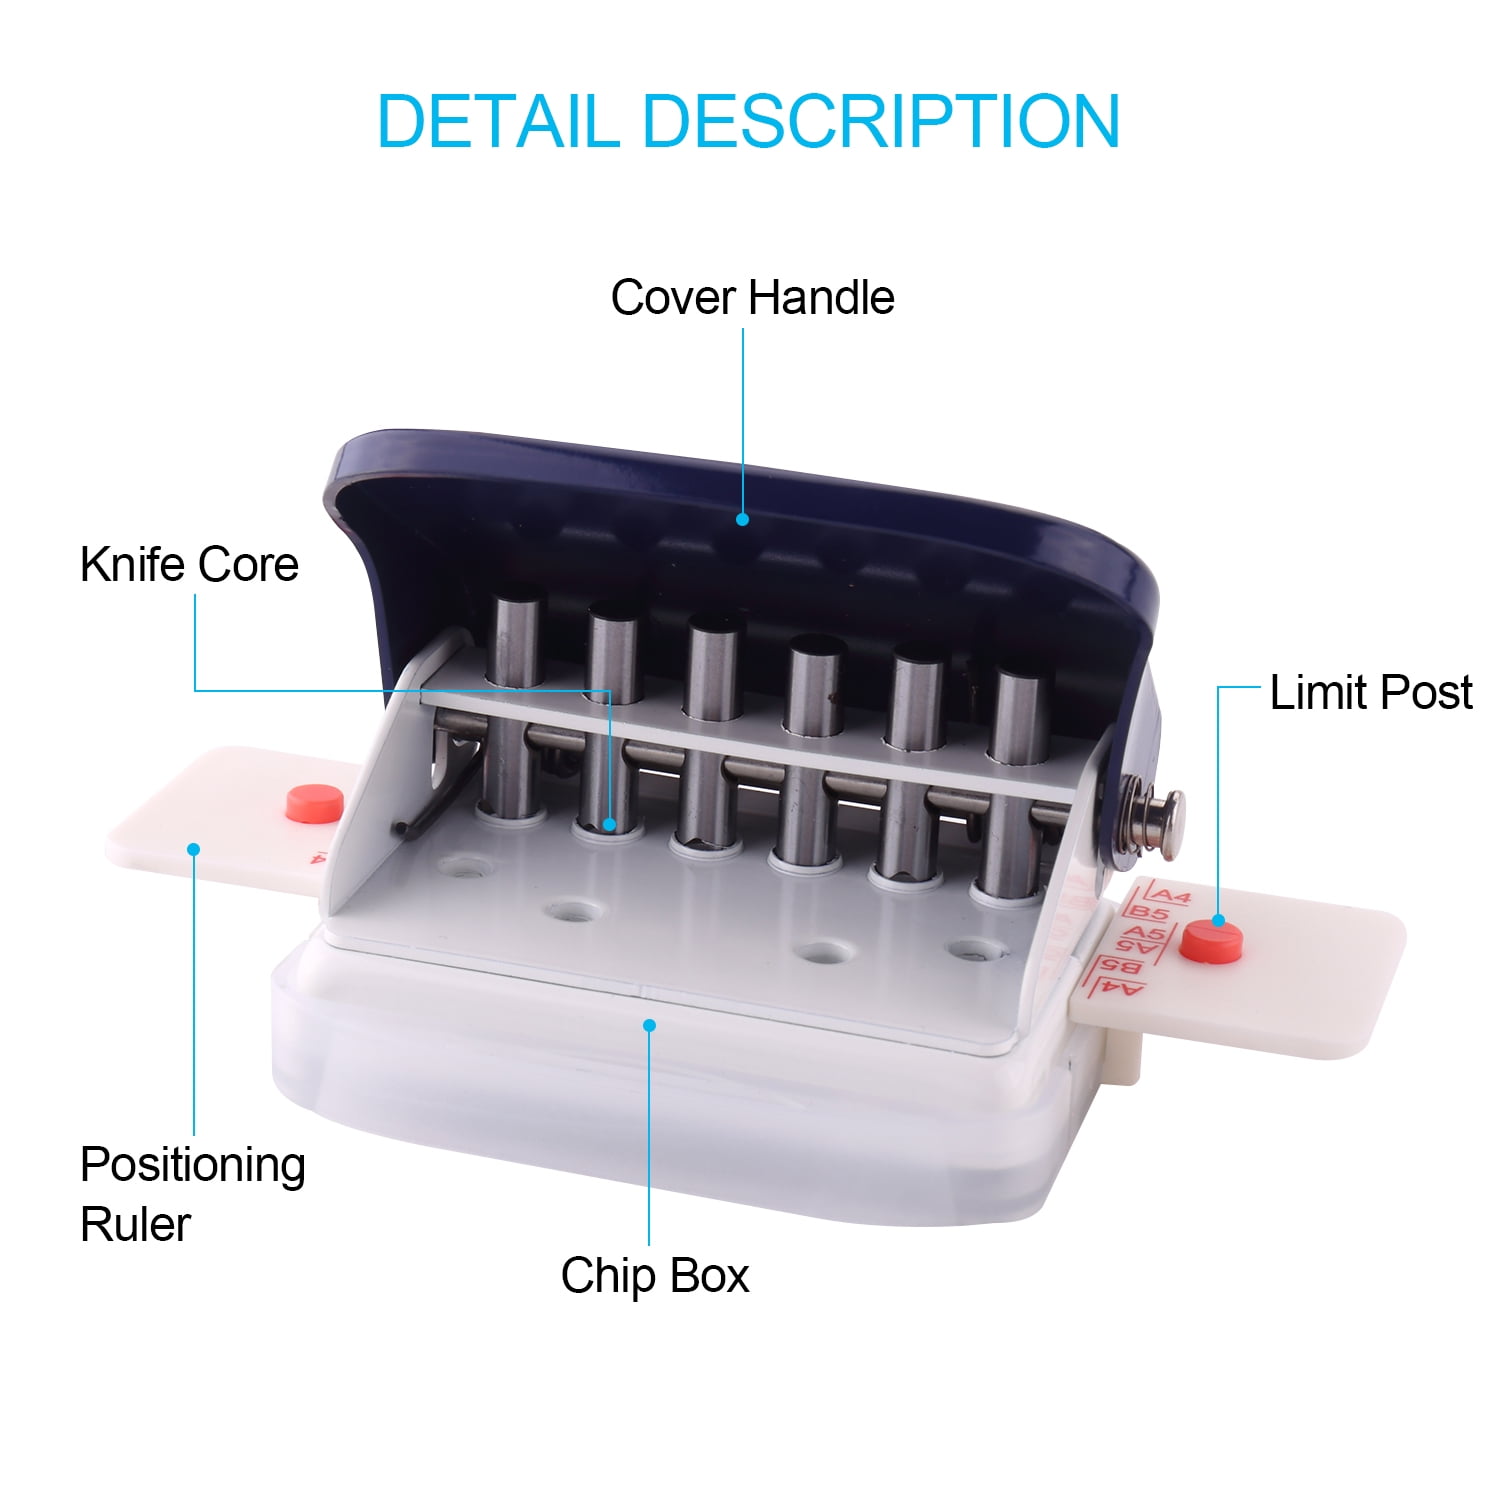 Kw-trio Kw-trio Adjustable 6-Hole Desktop Punch Puncher for A4 A5 A6 B7 Dairy Planner Organizer Six Ring Binder with 6 Sheet Capacity, Size: 19.8